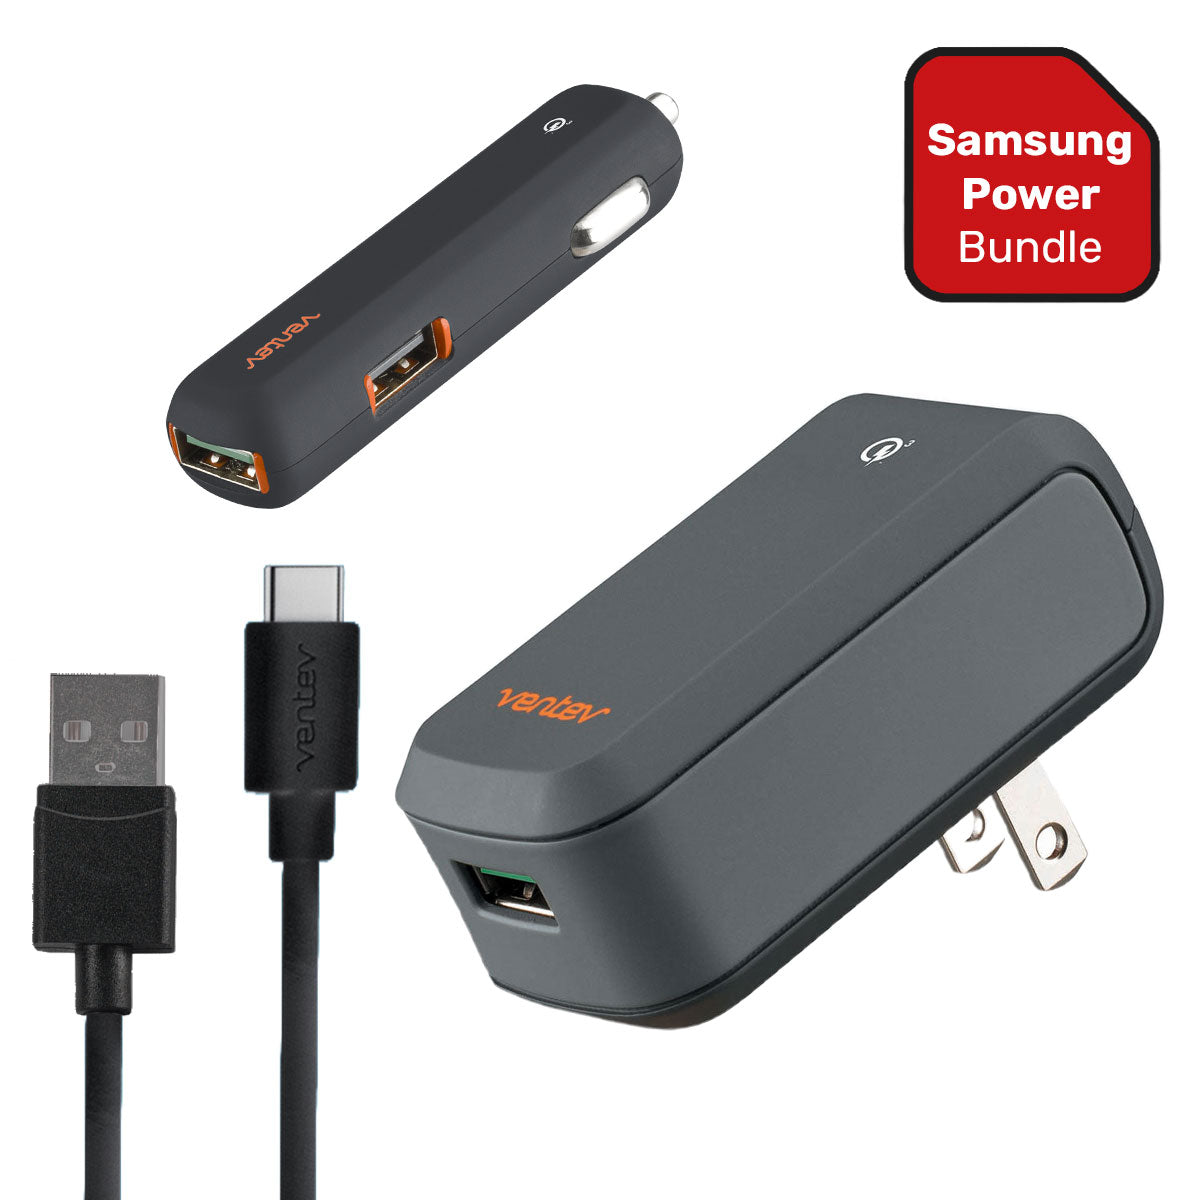 Ventev Power Bundle For Android Devices - Wall/Car Charger & Cable